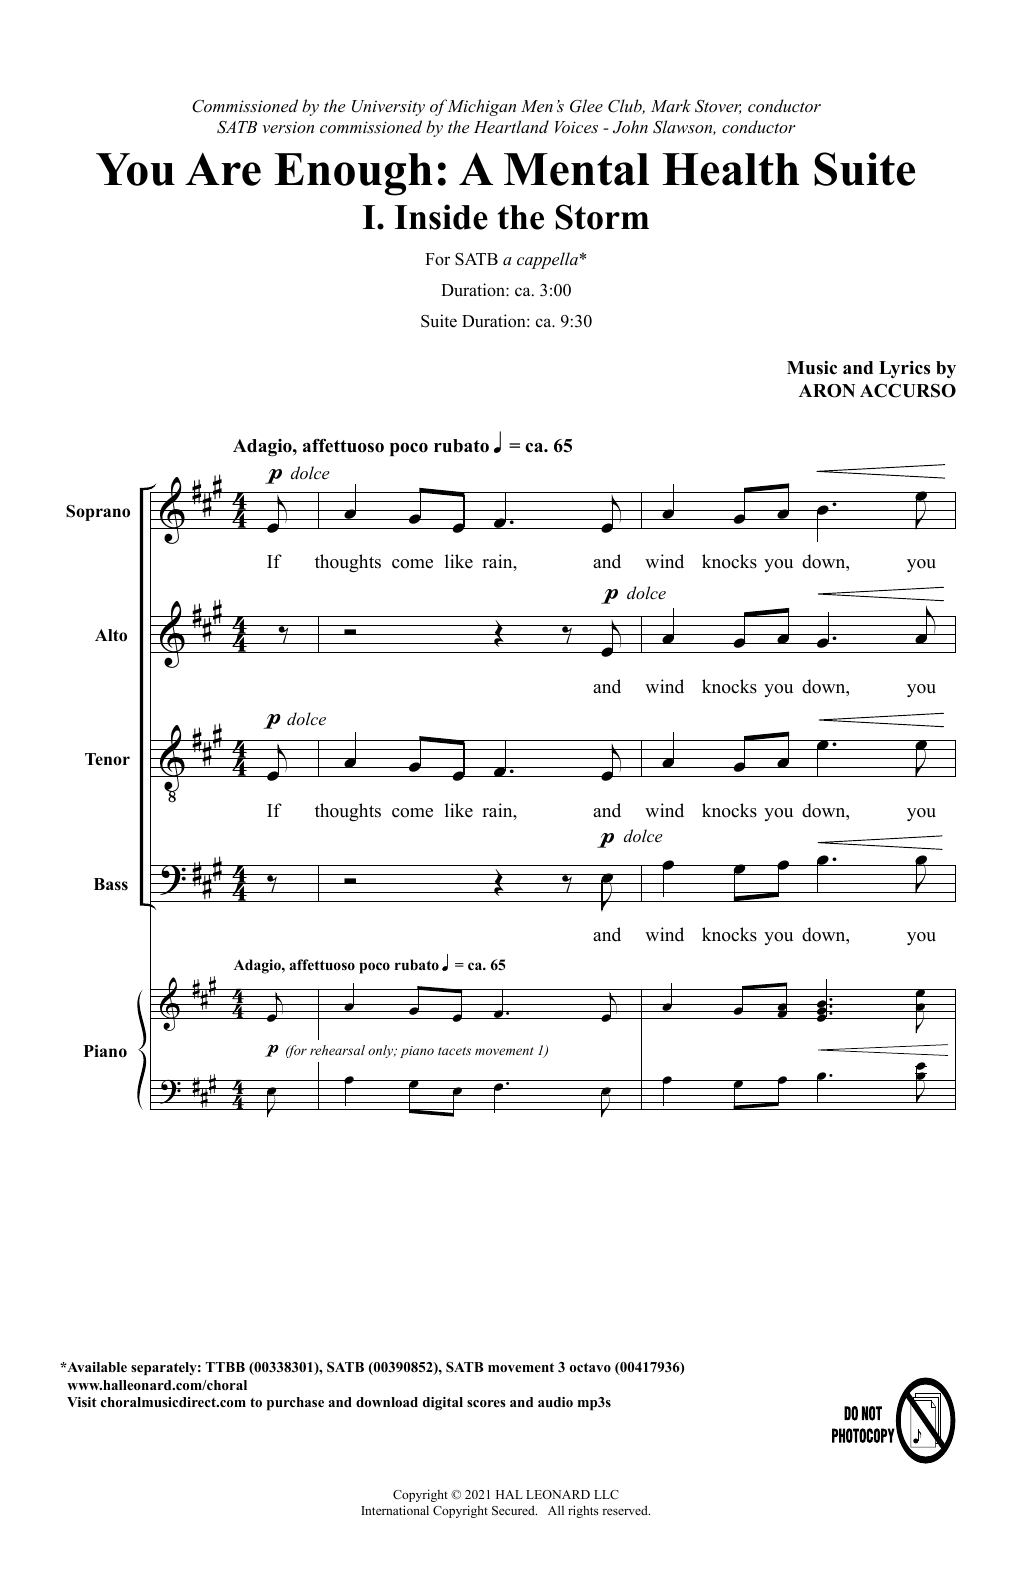 Download Aron Accurso and Rachel Griffin Accu You Are Enough: A Mental Health Suite Sheet Music